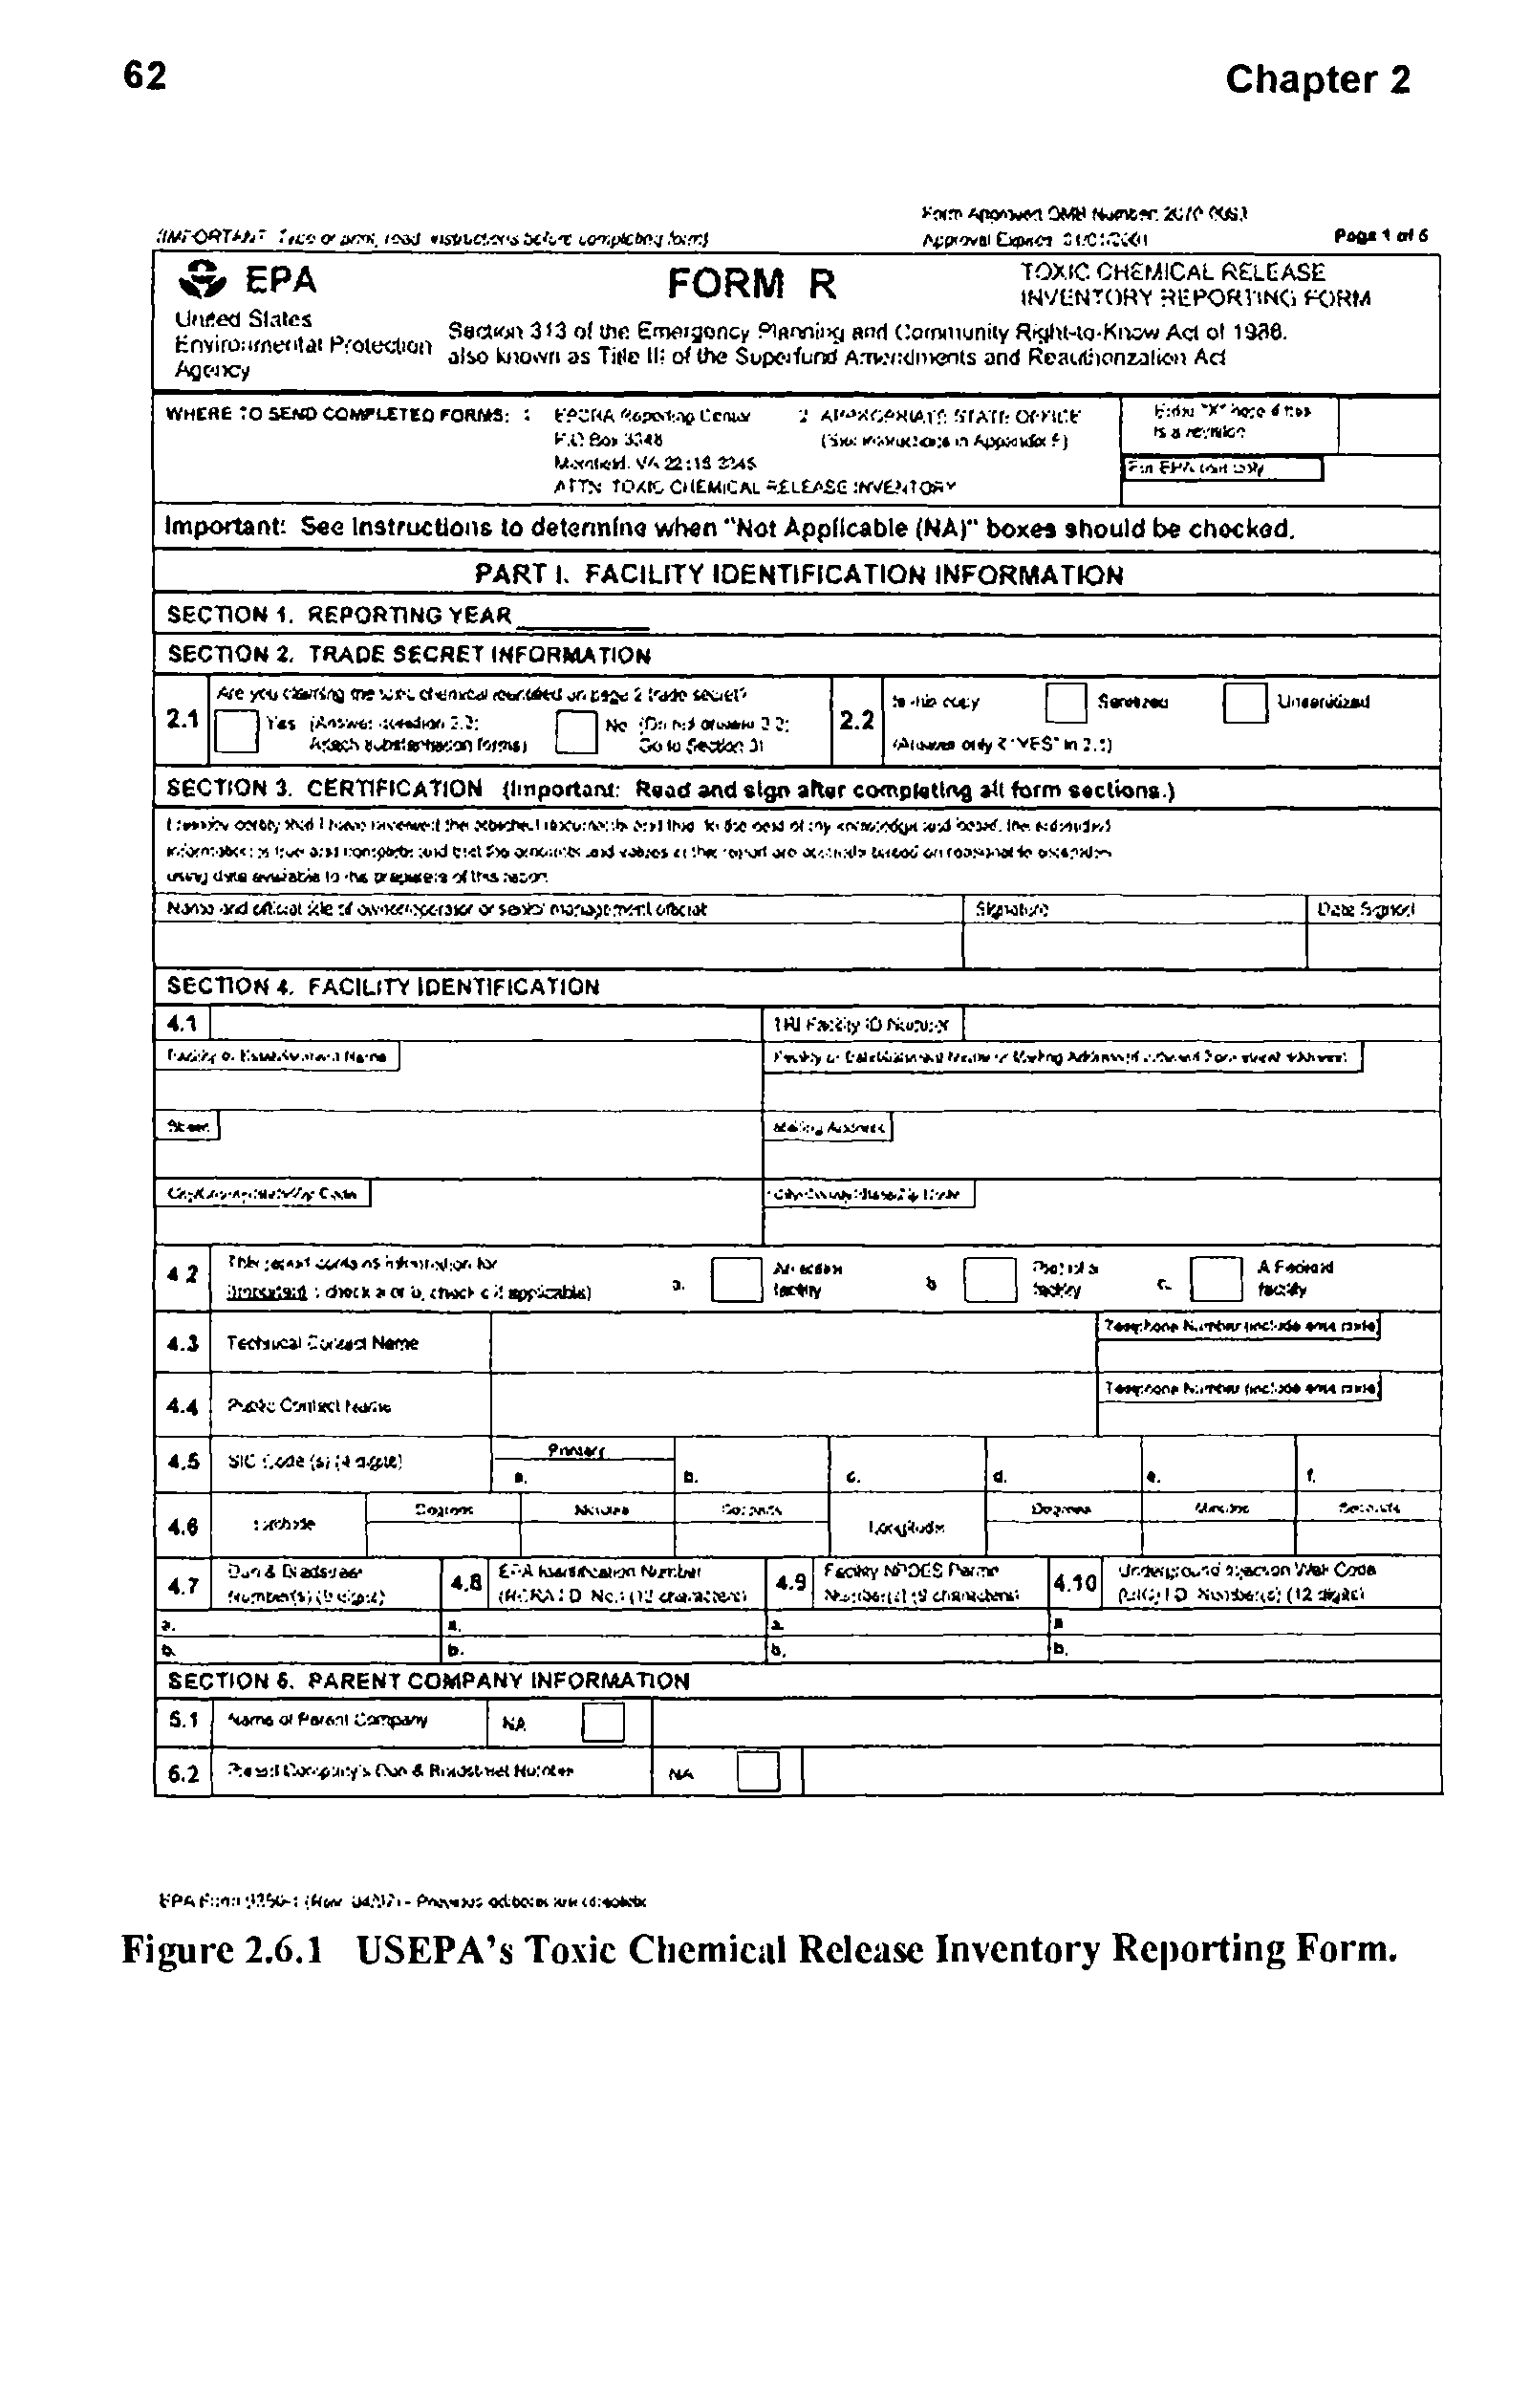 Figure 2.6.1 USEPA s Toxic Chemical Release Inventory Reporting Form.